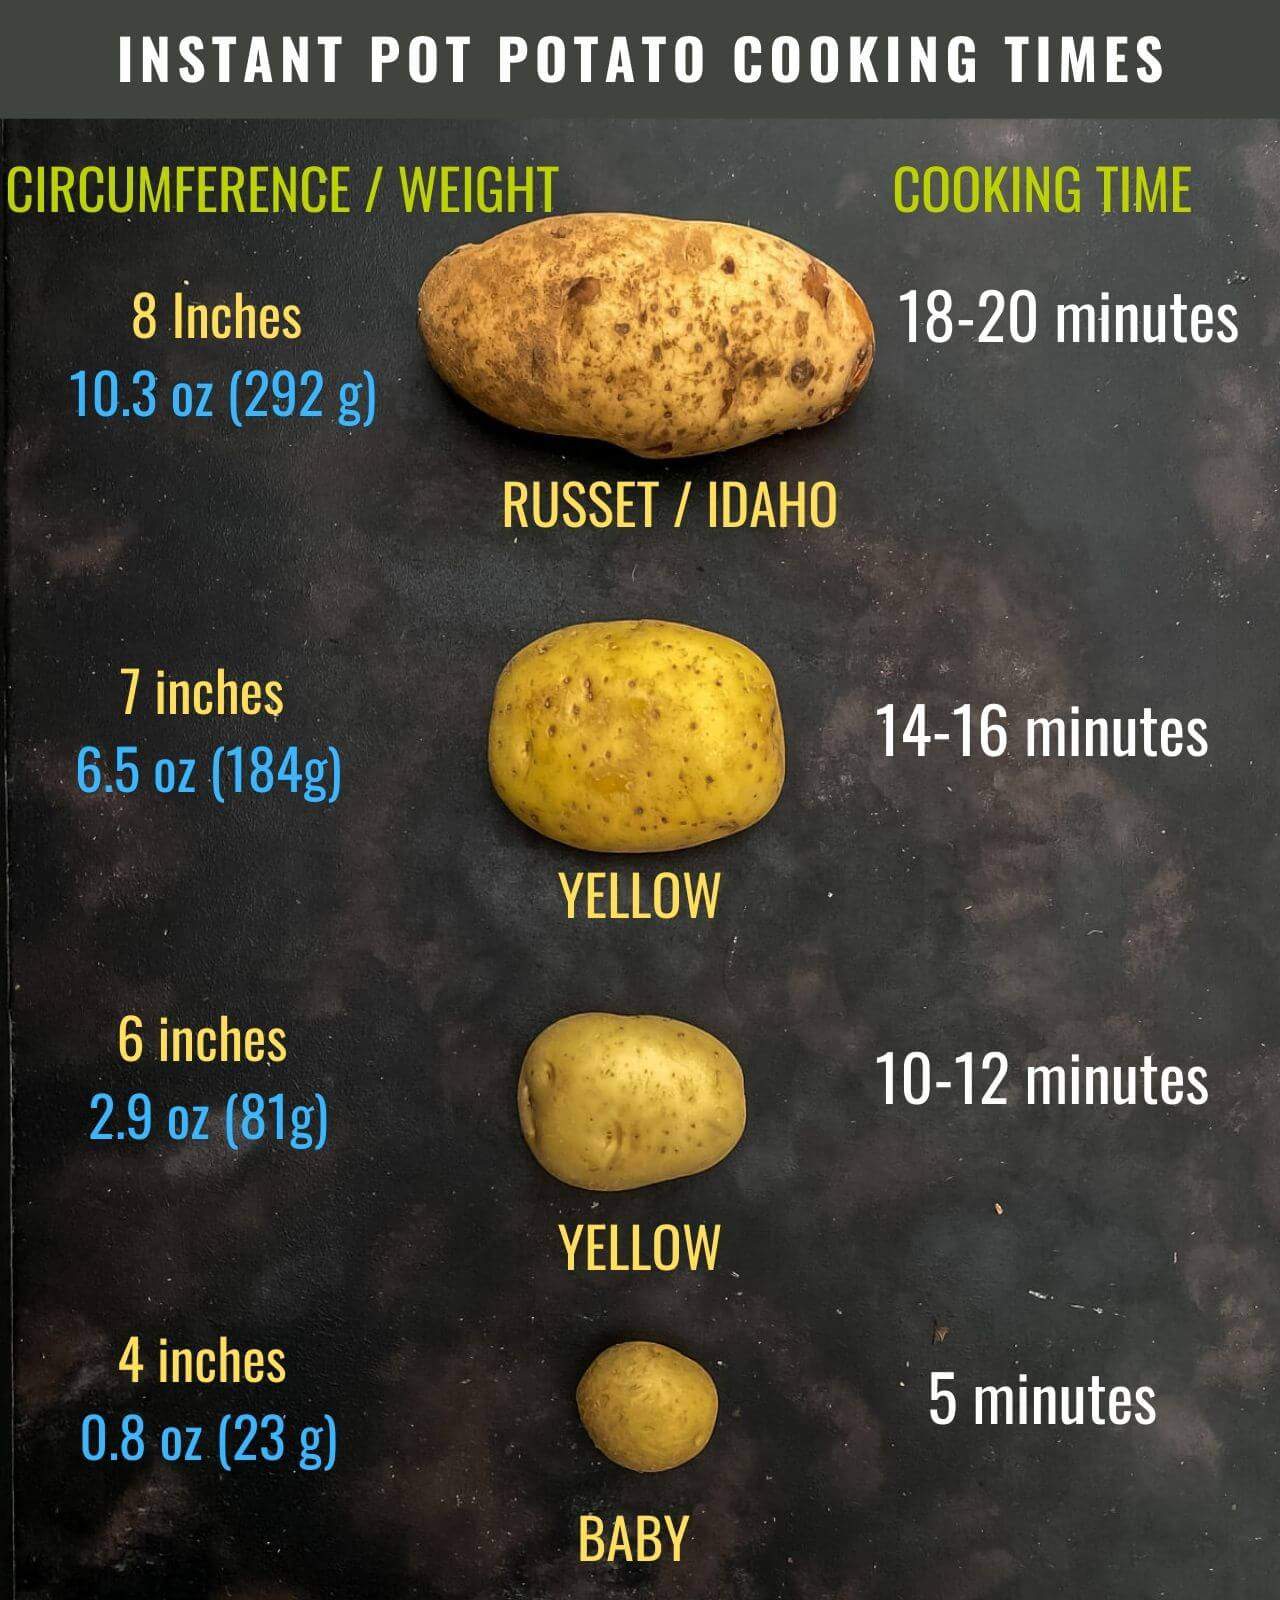 A visual guide telling you how long to cook each sized potato from largest at the top to smallest at the bottom and the words Instant Pot Potato Cooking Times at the top.